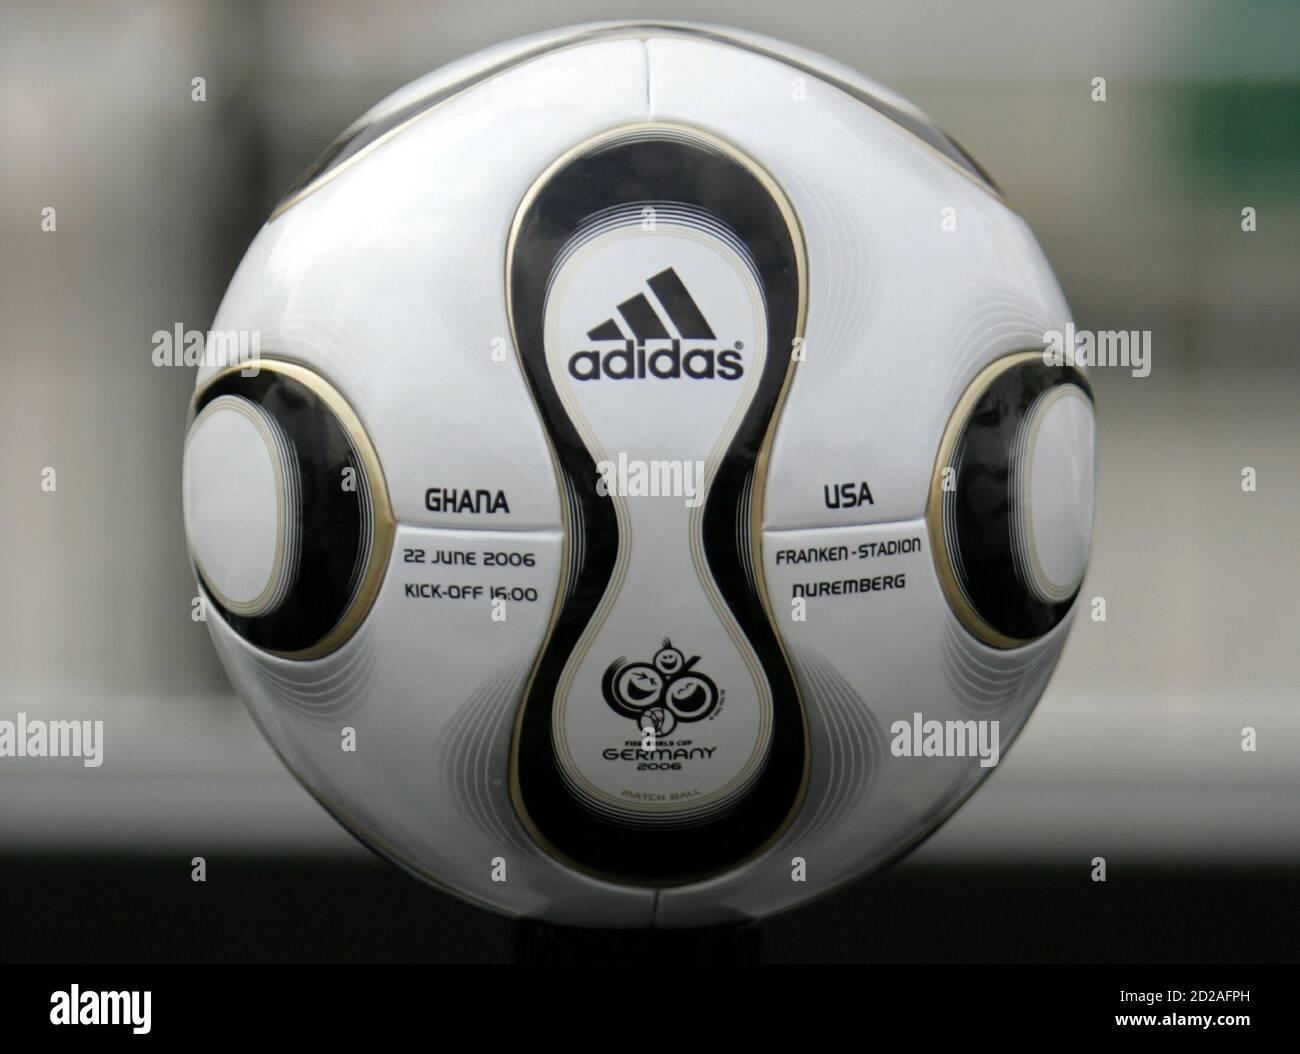 The soccer ball for the FIFA 2006 Soccer World Cup match between Ghana and  USA in Nuremberg is presented to the [media] in Berlin April 18, 2006.  [President of Germany's World Cup